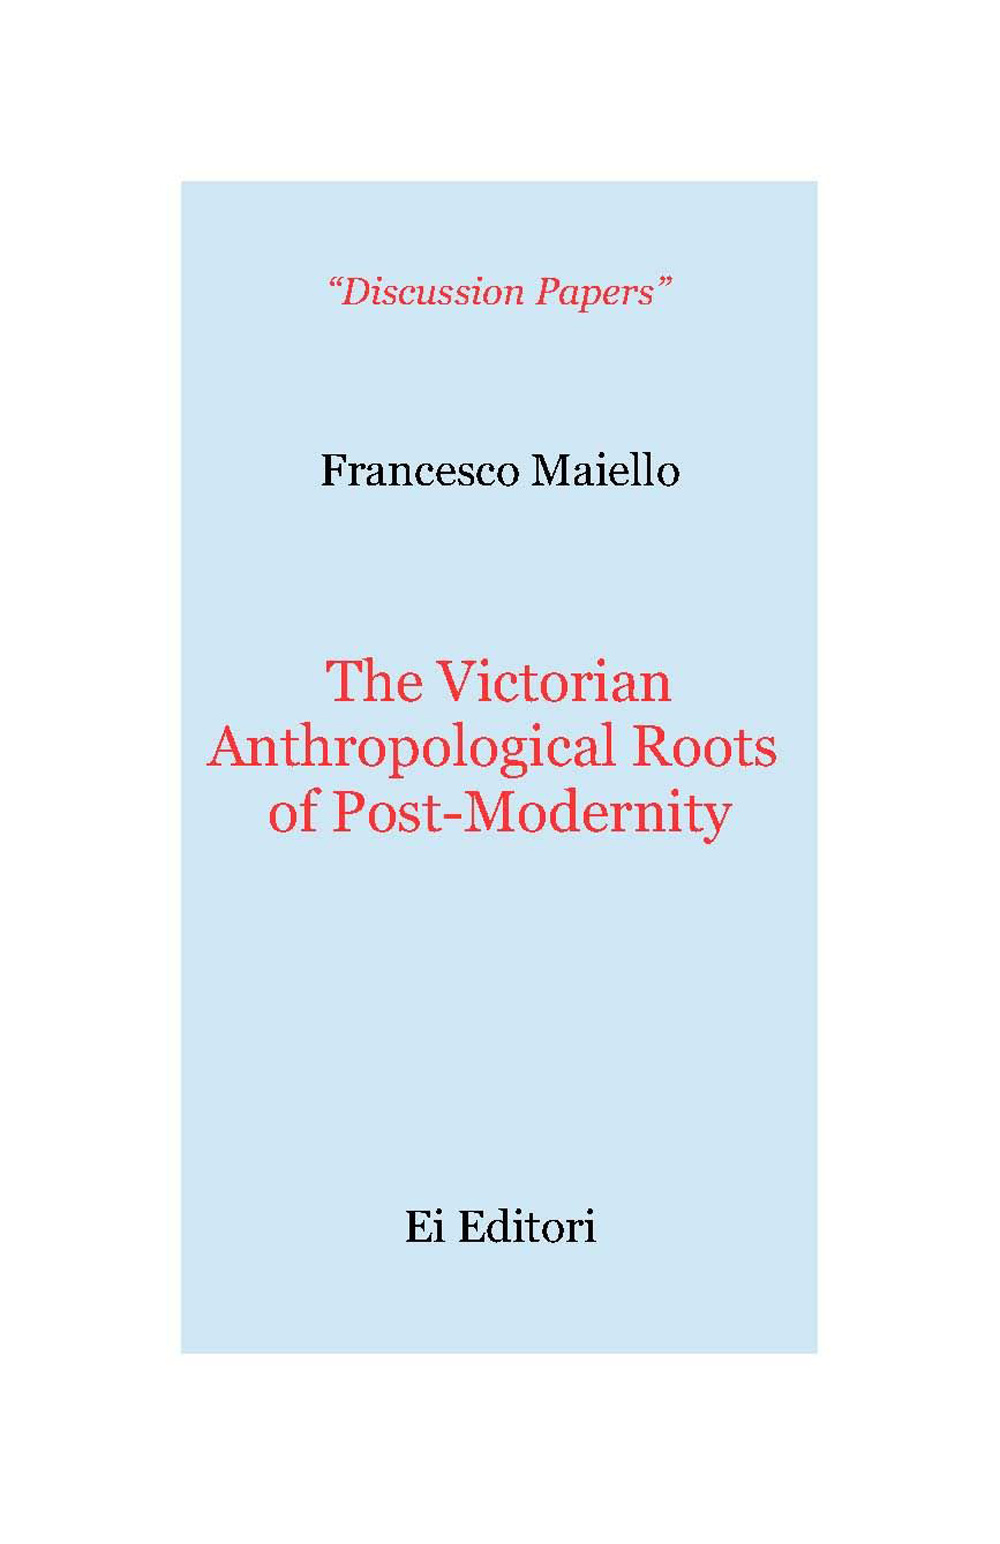 The victorian anthropological roots of post-modernity